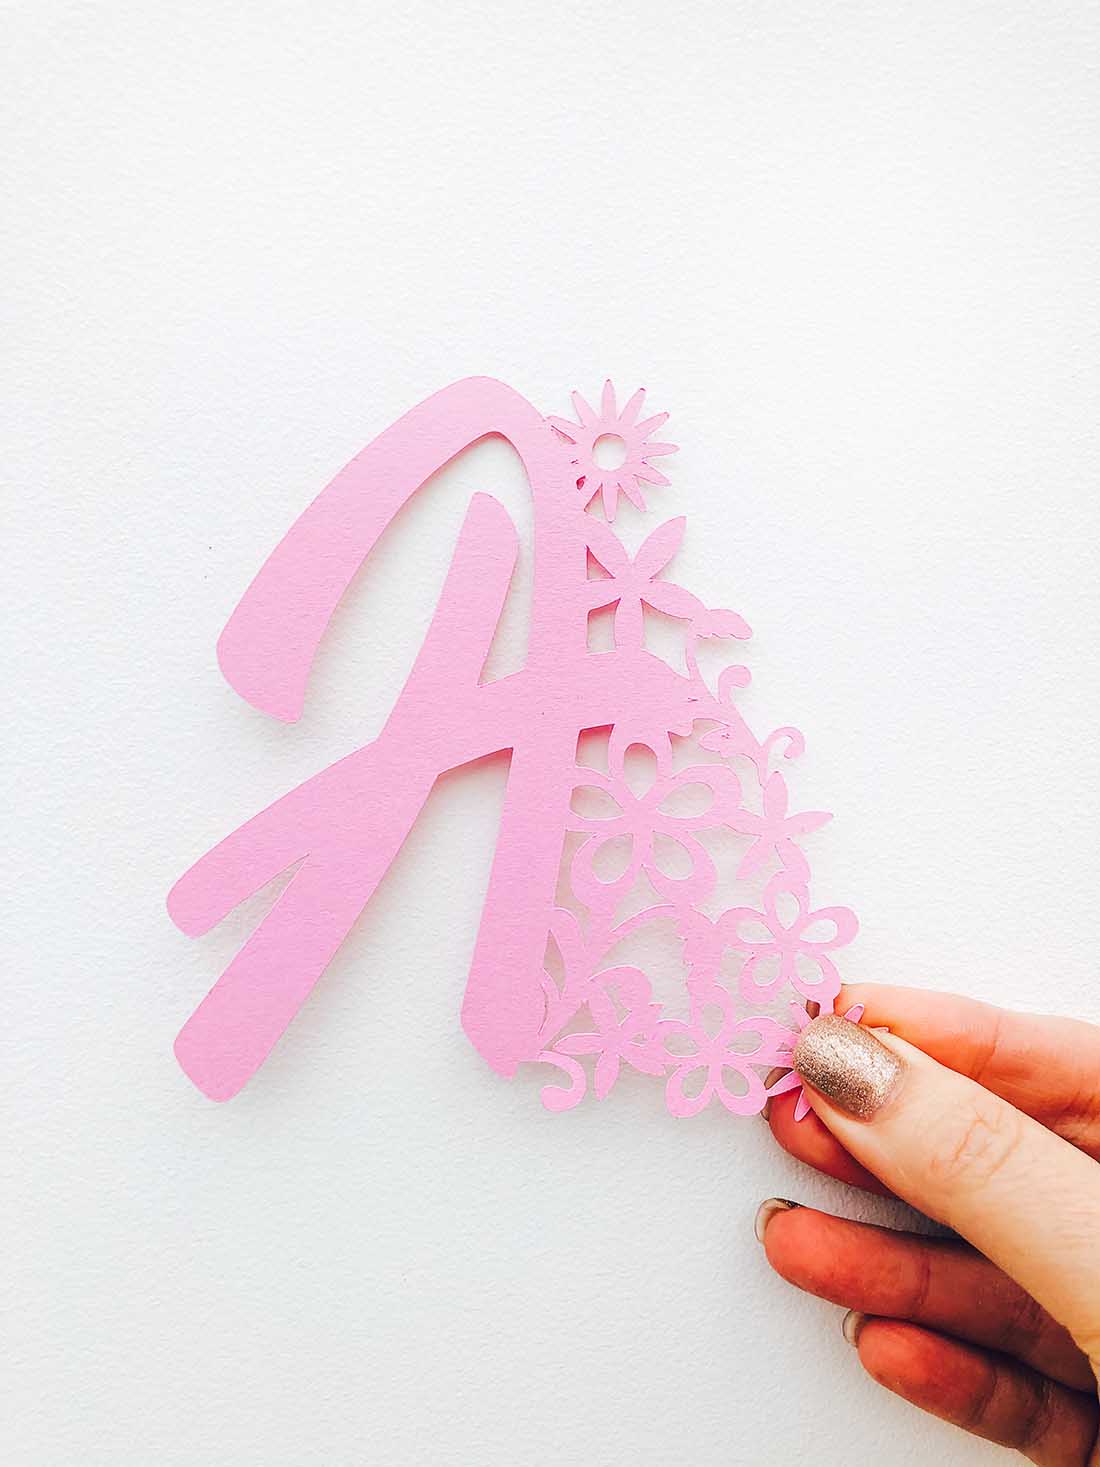 Flowery Cricut letters and numbers for crafting and cake toppers